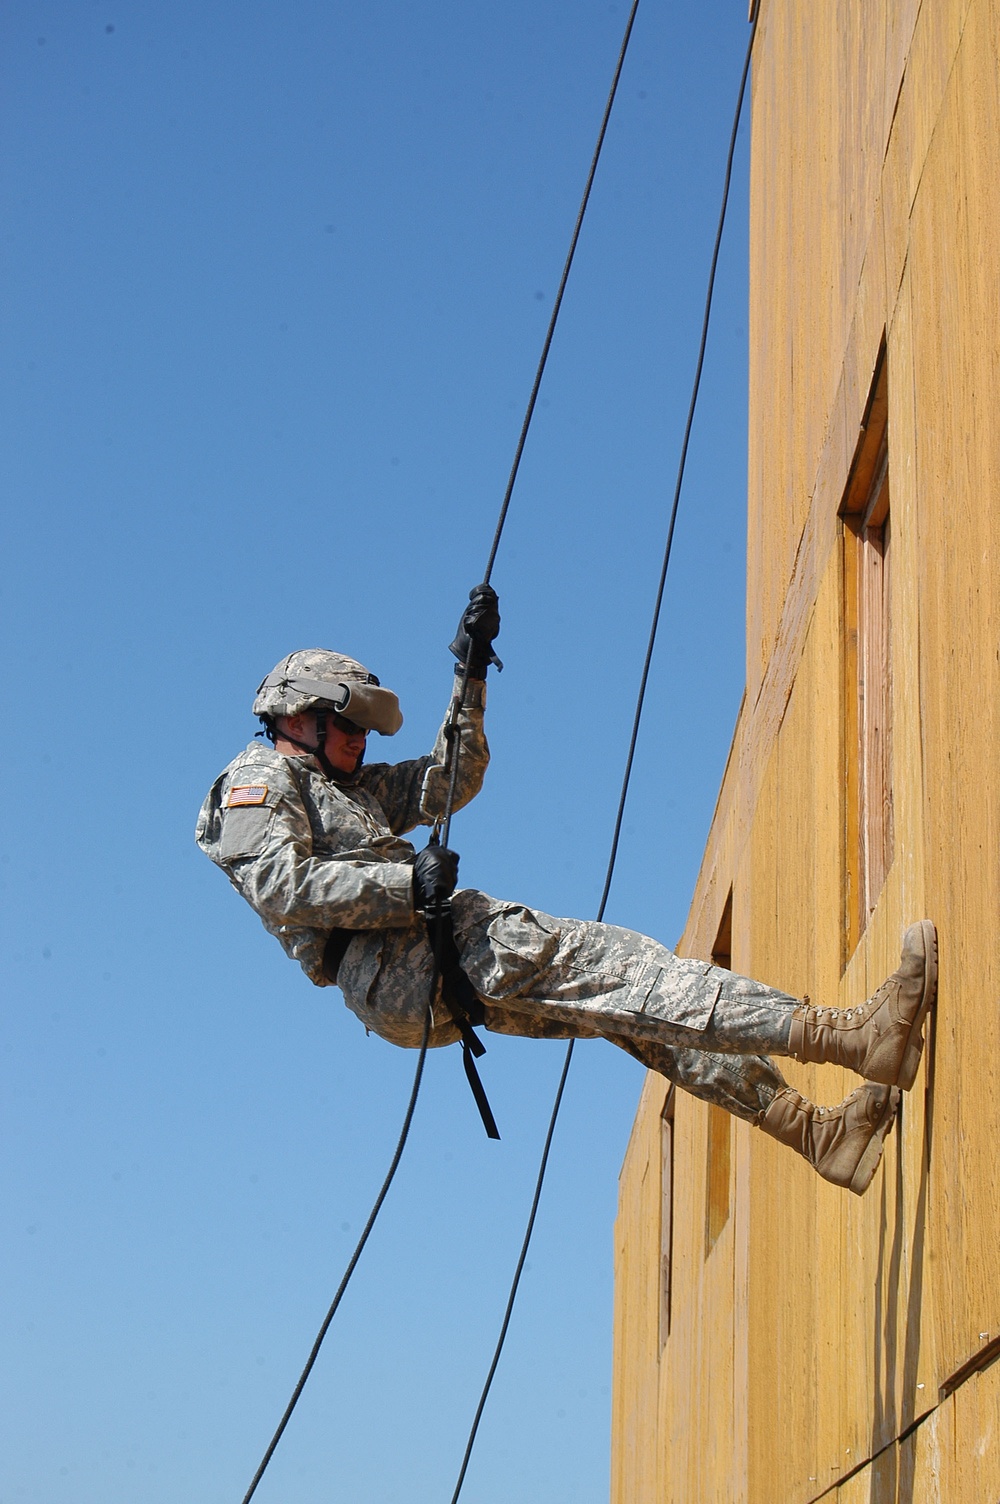 DVIDS - News - Soldiers learn to rappel to enhance capabilities